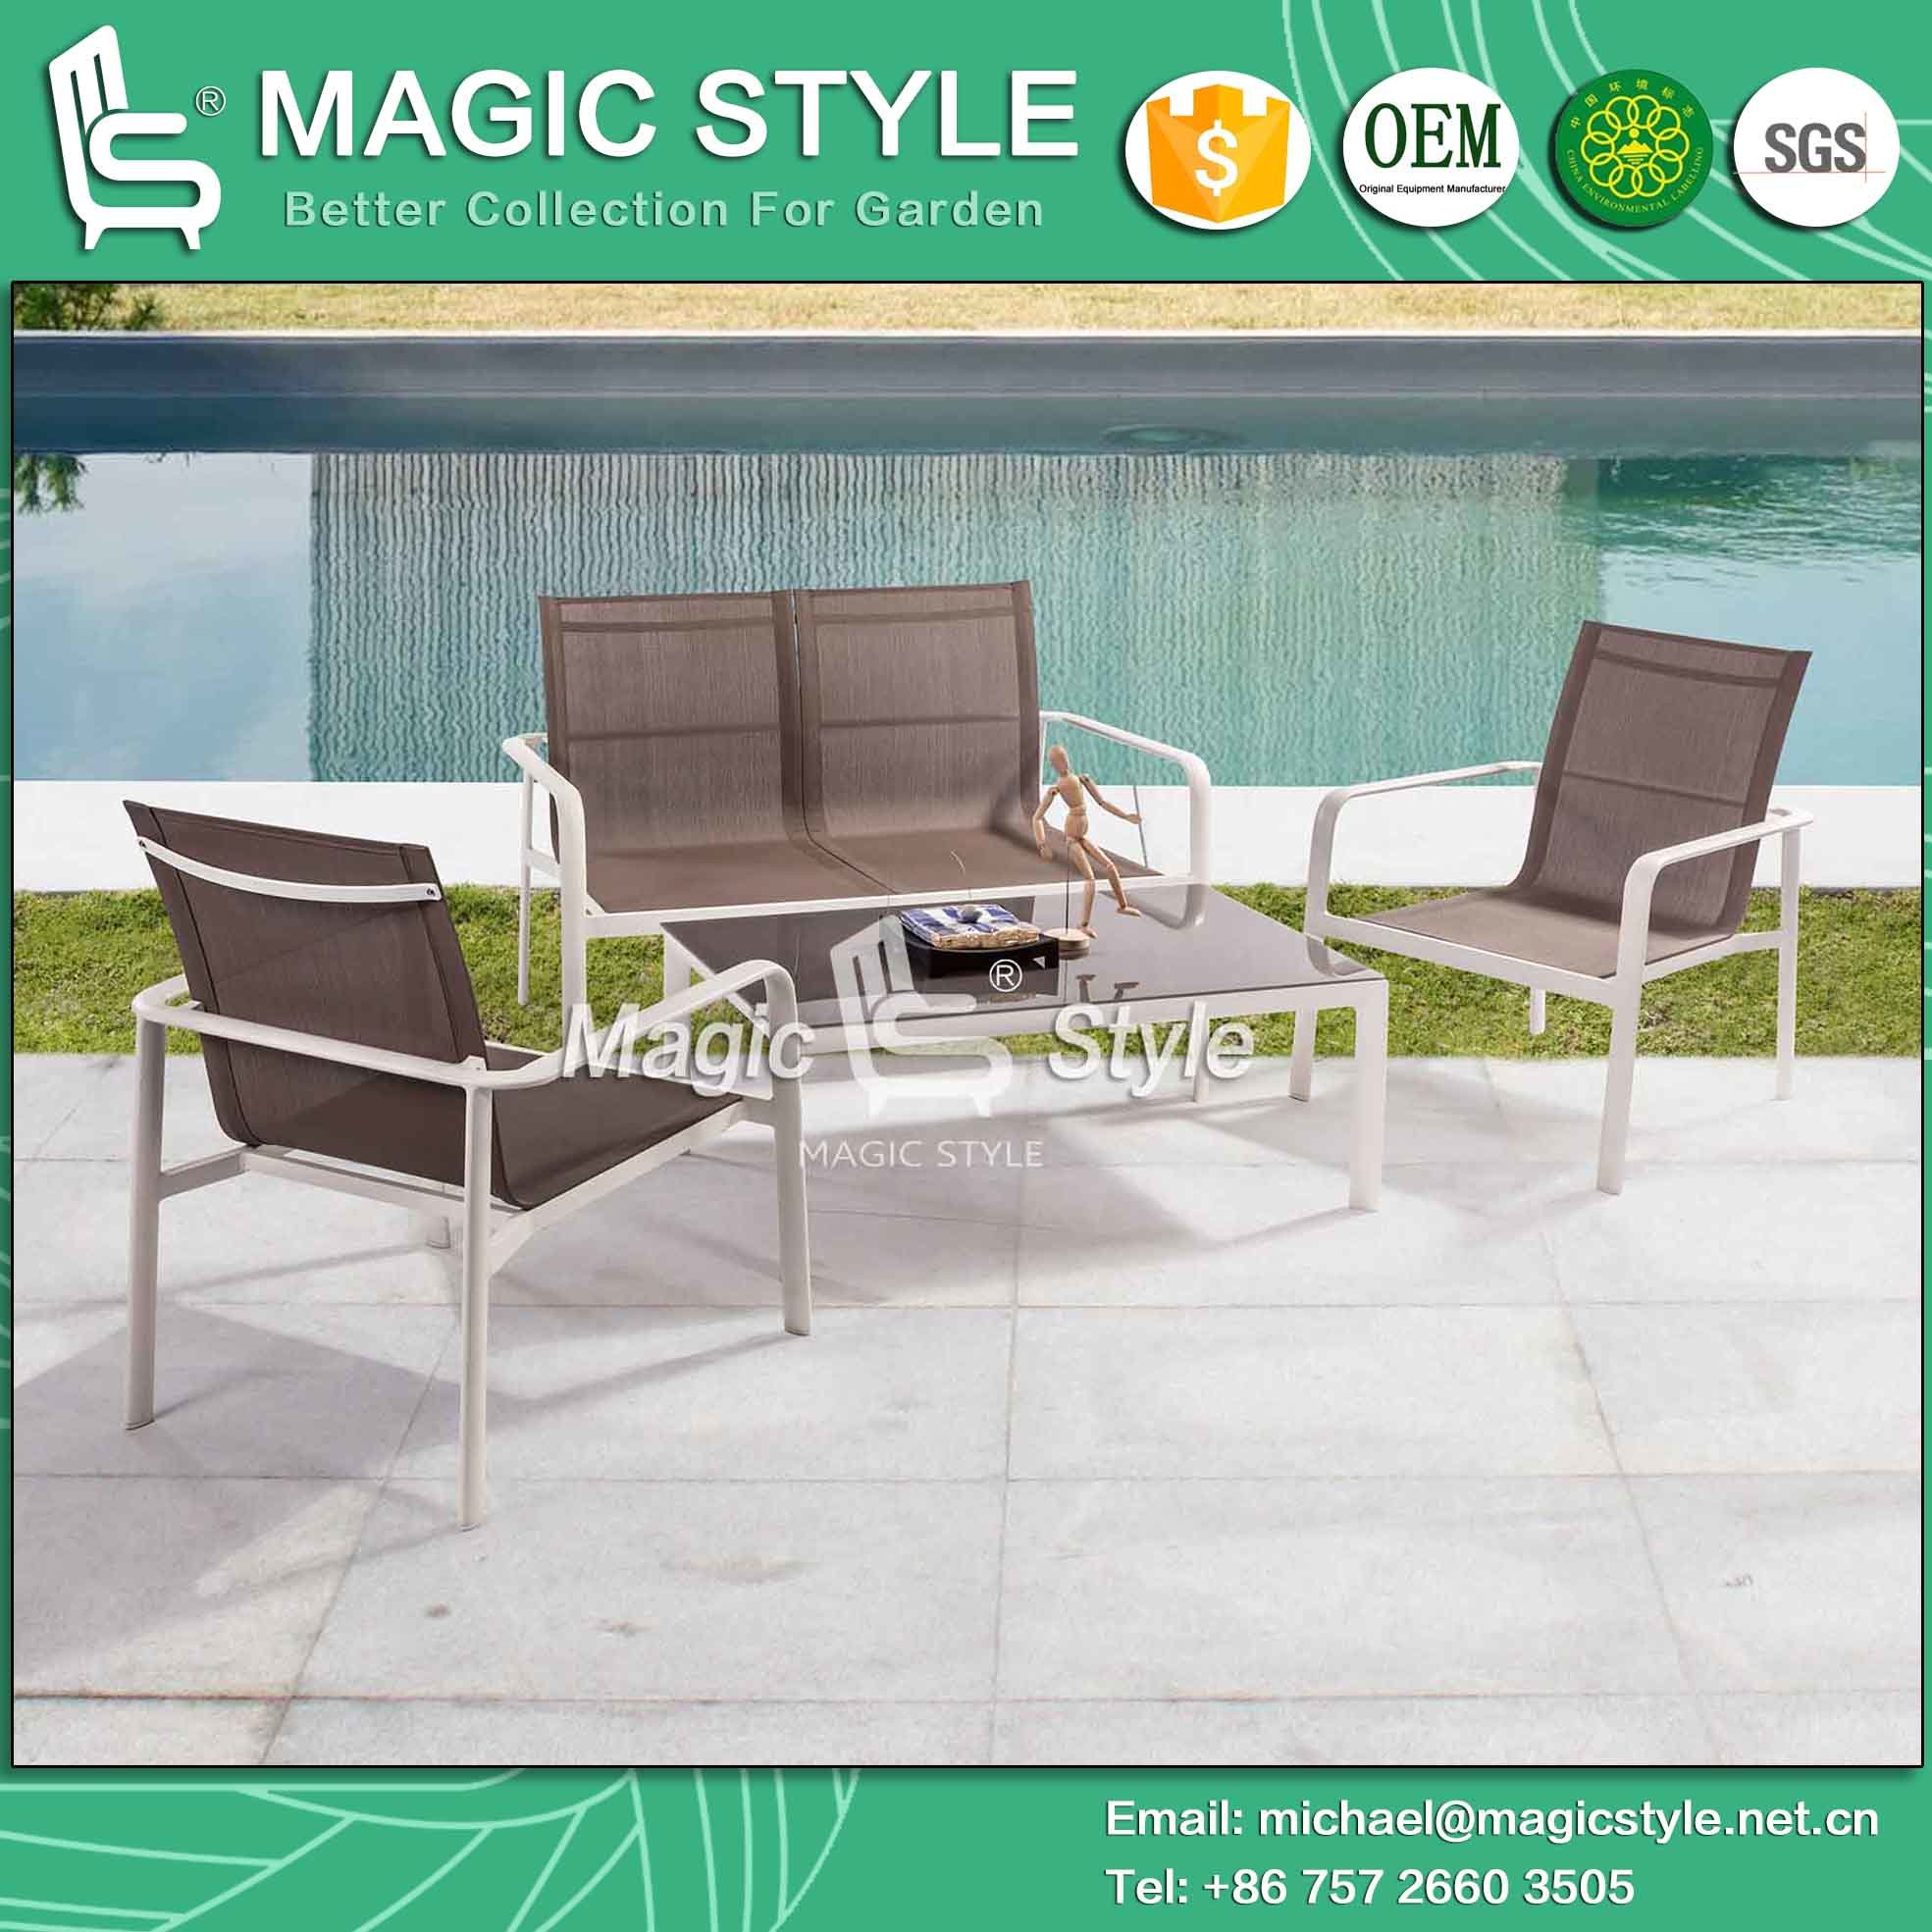 Sling Sofa Set Textile Chair Textile Furniture Outdoor Furniture Aluminum Furniture Stackable Chair (Magic Style)